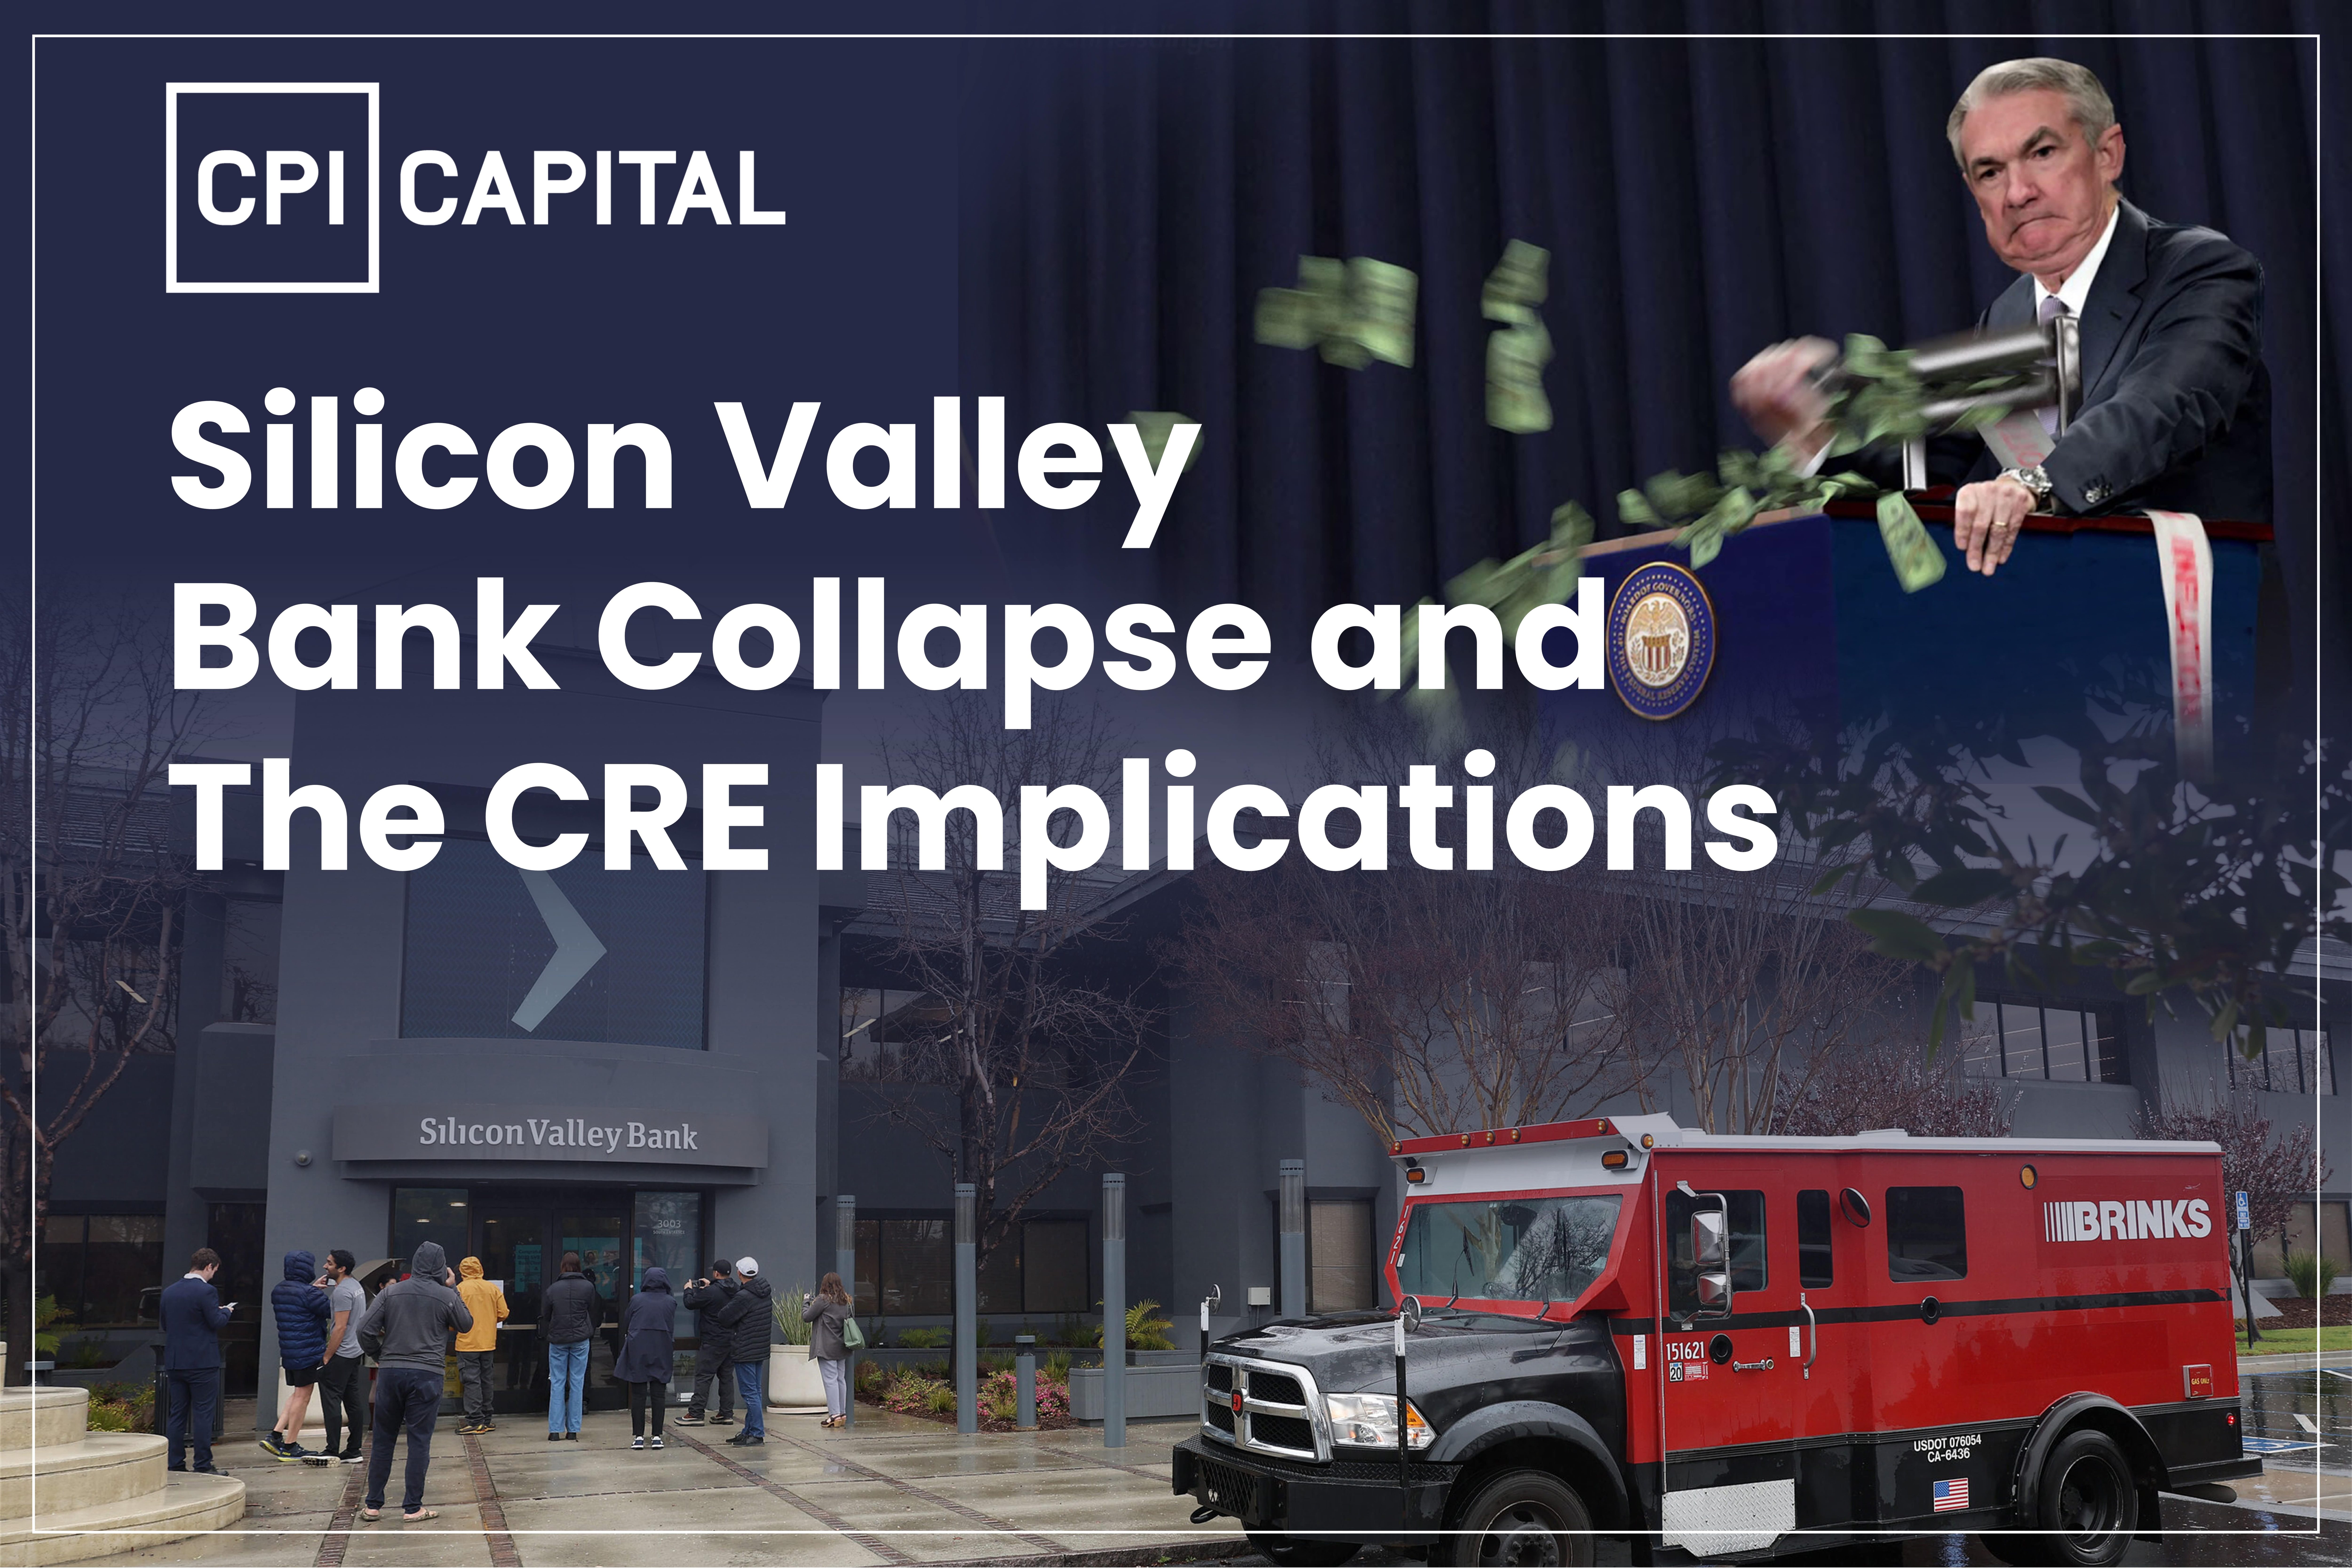 Silicon Valley Bank Collapse and Implications for CRE Investments